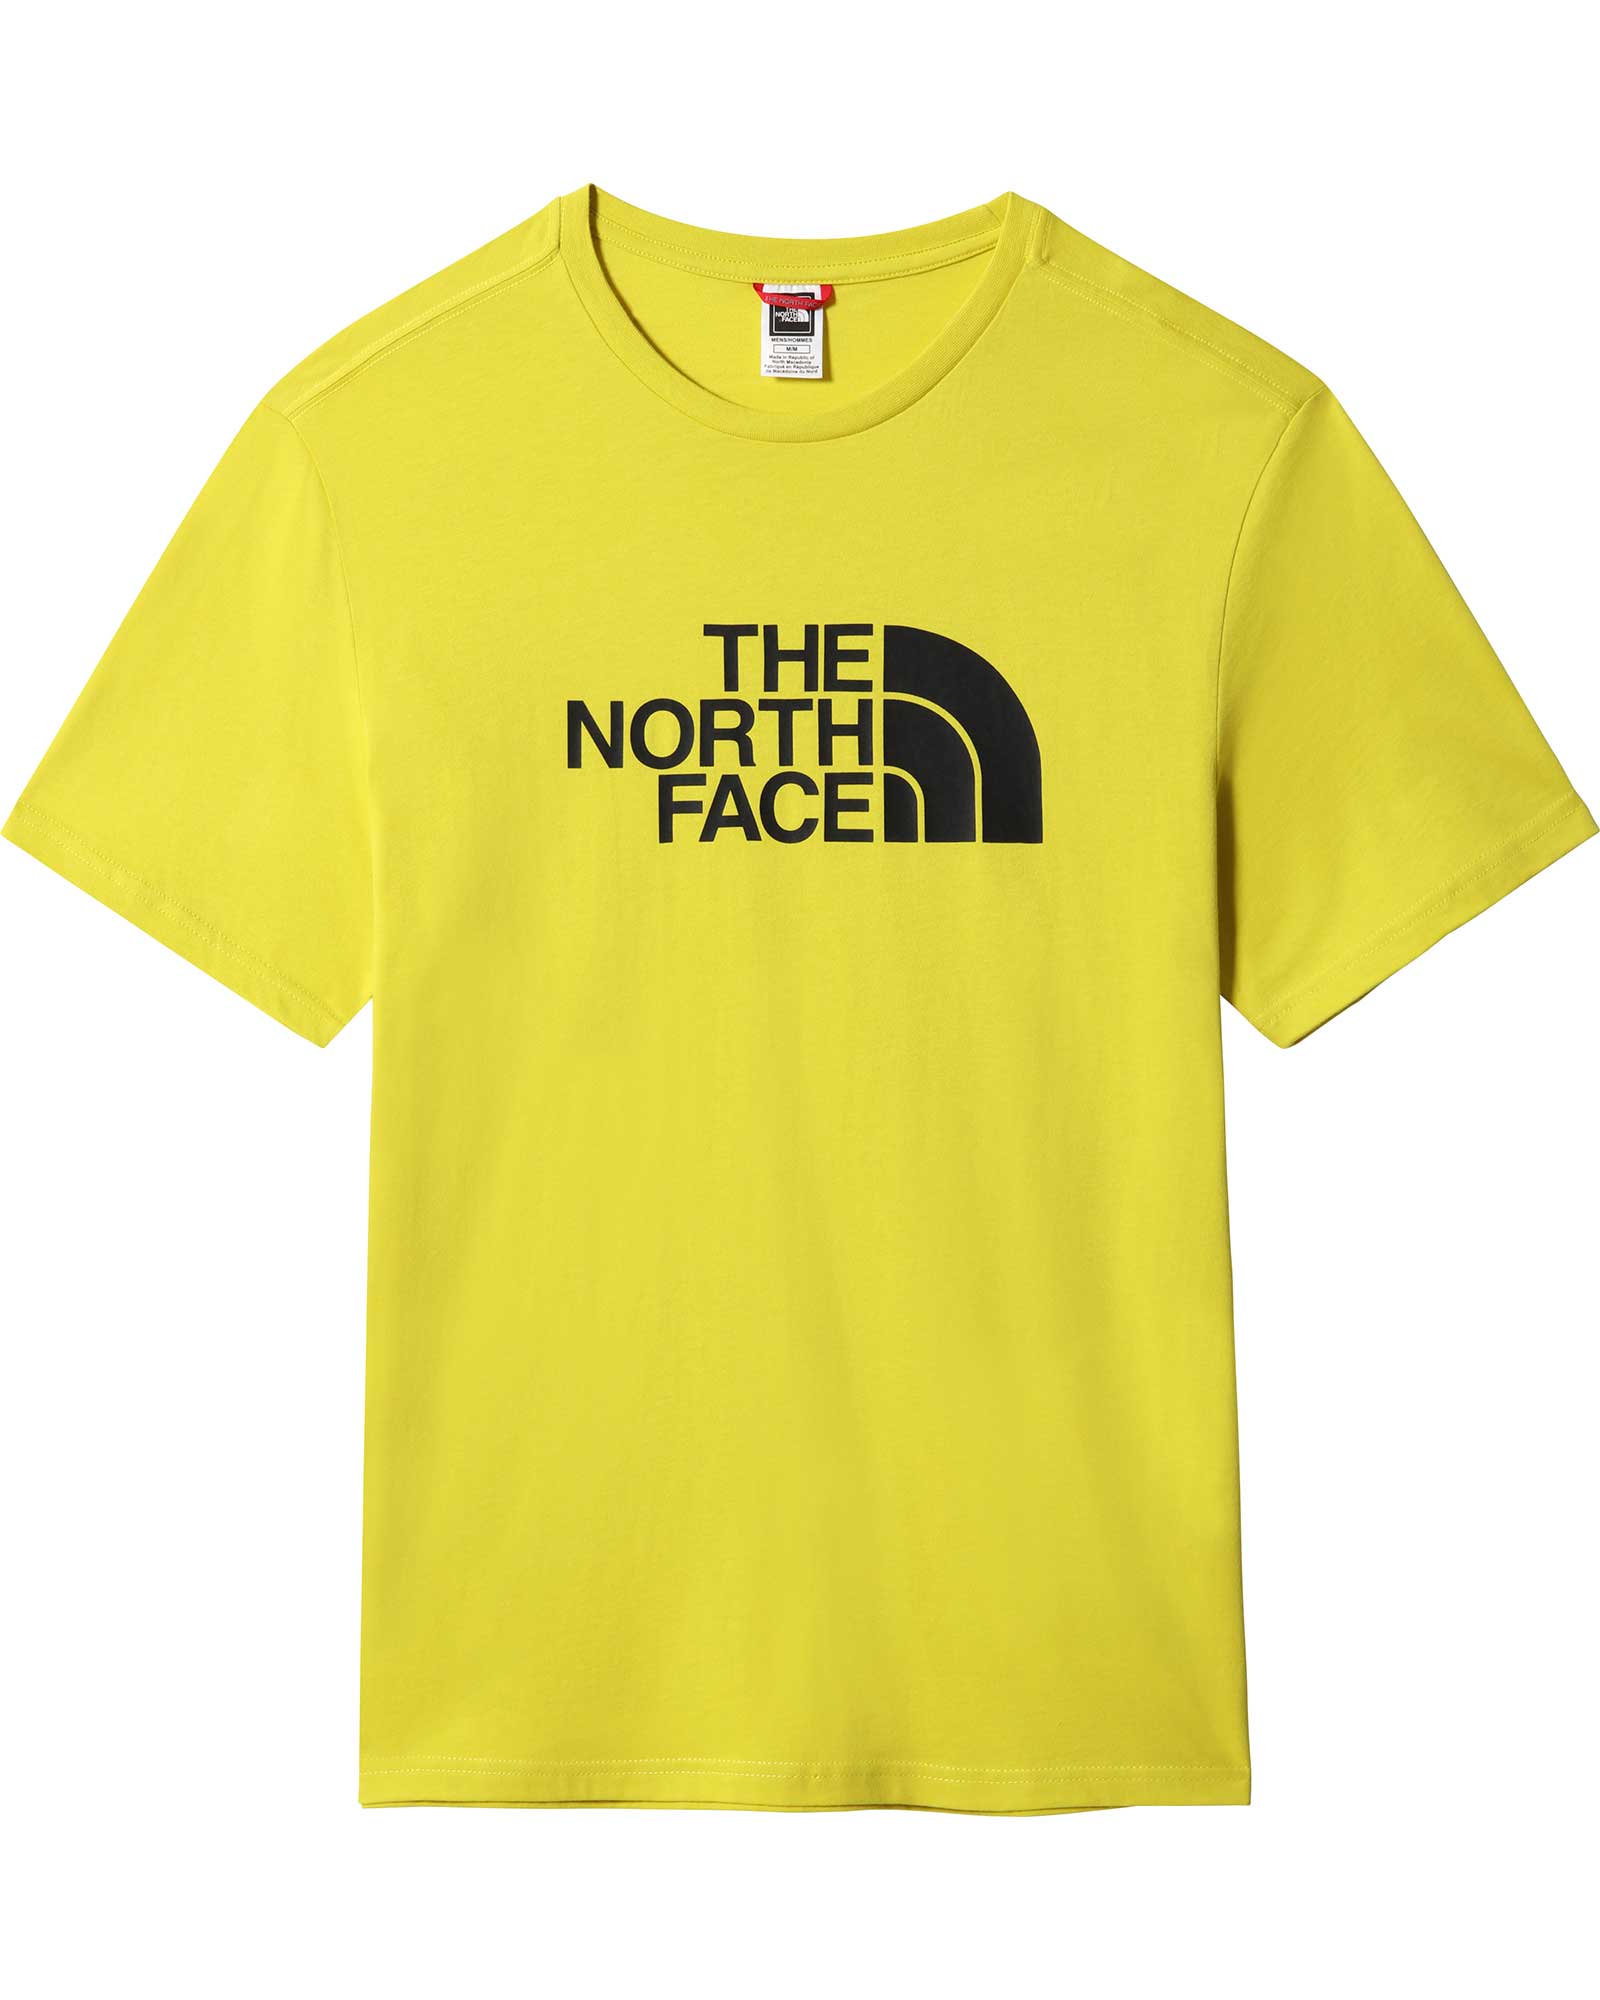 The North Face Easy Men’s T Shirt - Acid Yellow S